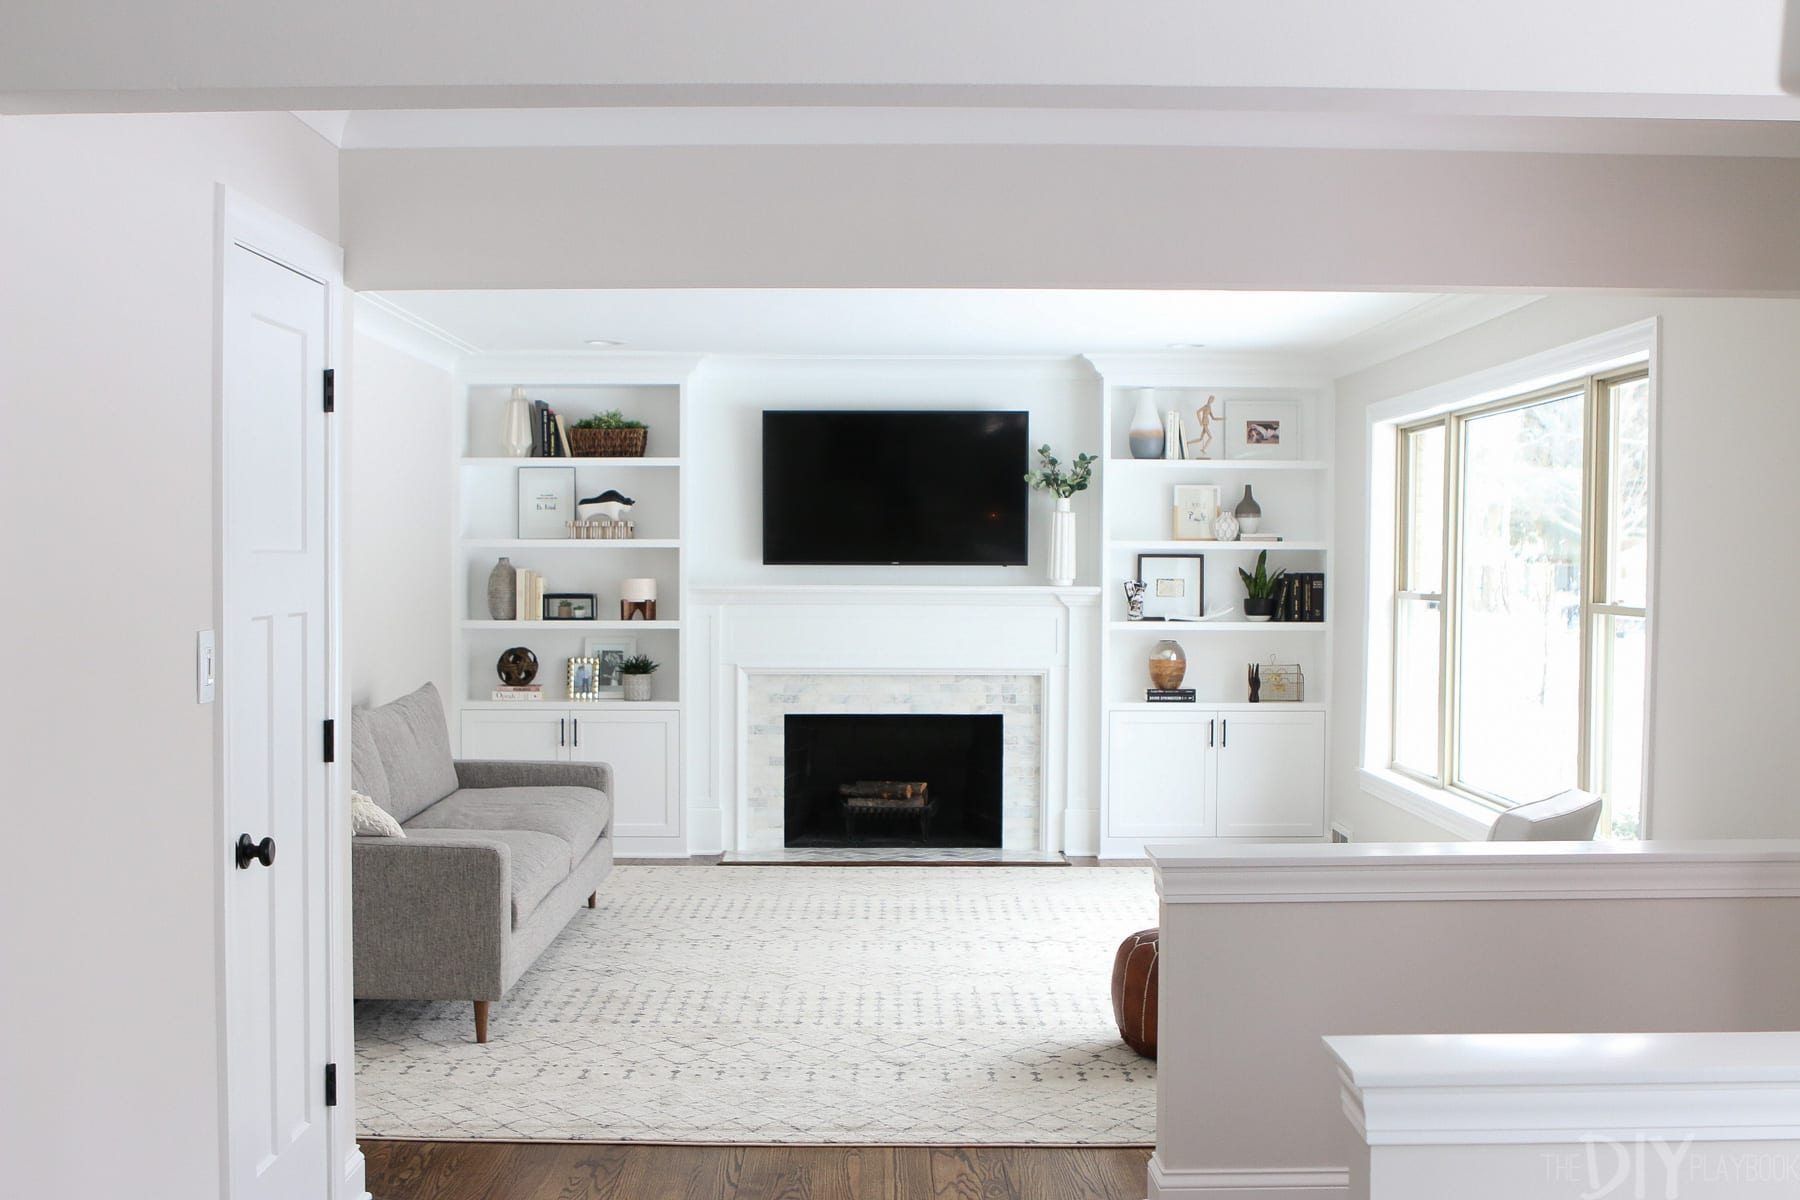 White Built Ins Around The Fireplace, How To Make Built In Shelves Around Fireplace